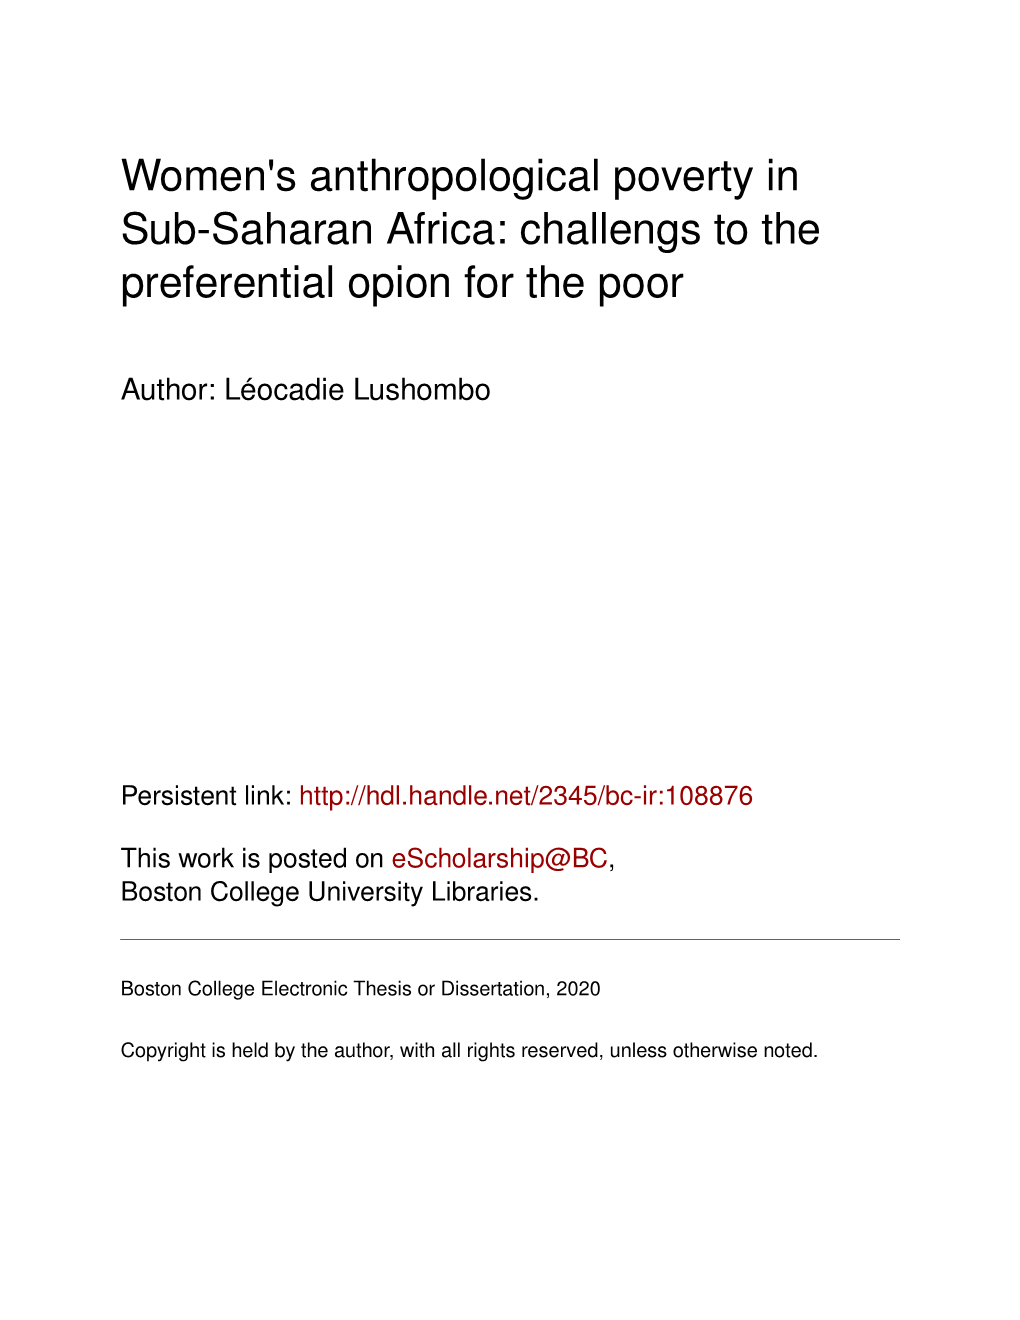 Women's Anthropological Poverty in Sub-Saharan Africa: Challengs to the Preferential Opion for the Poor